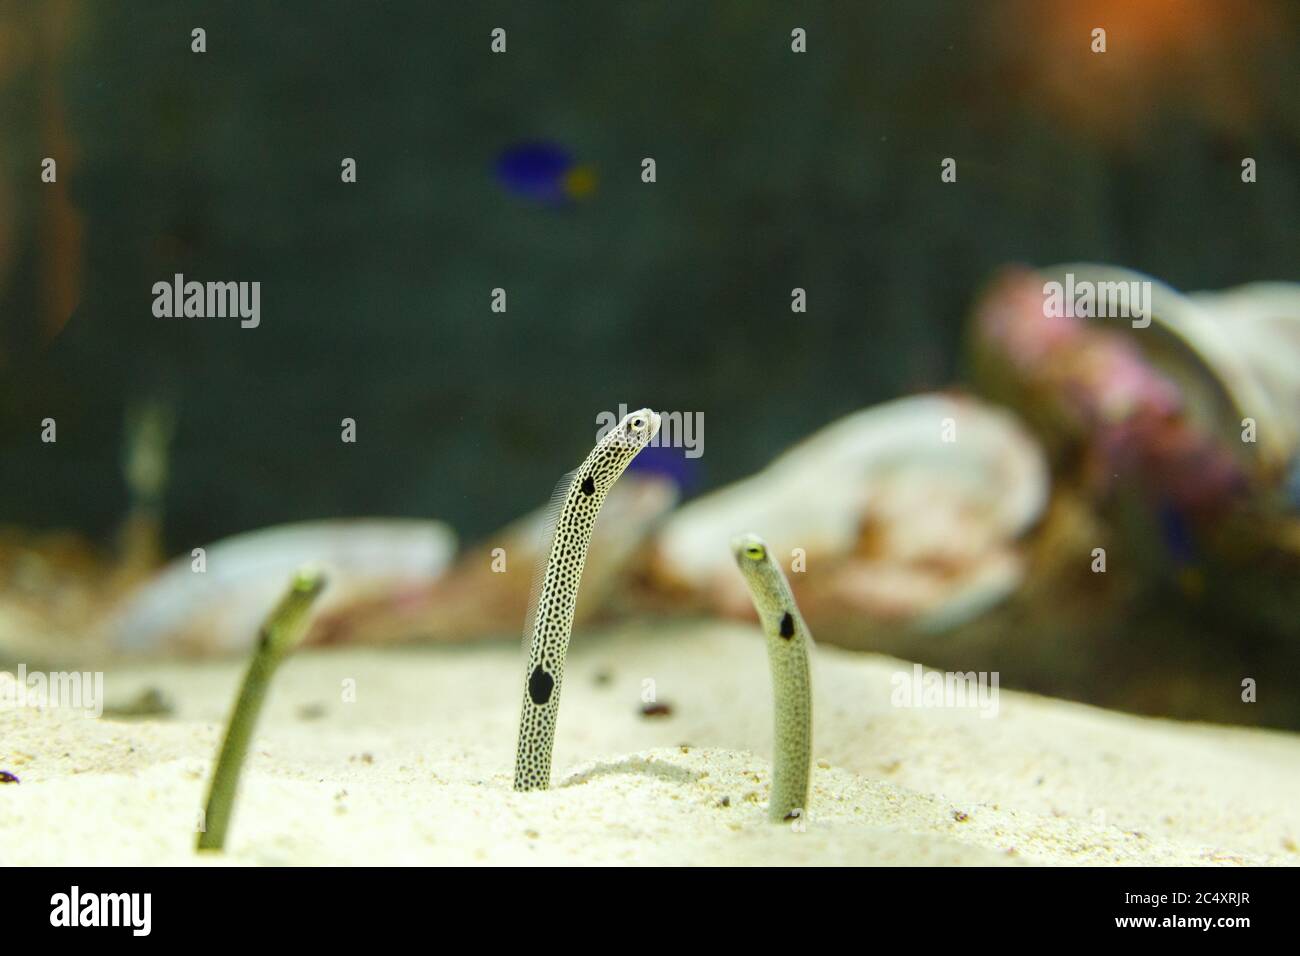 Spotted garden eel or Heteroconger hassi in aquarium in Dubai, UAE. They are showing their face from sand. Stock Photo